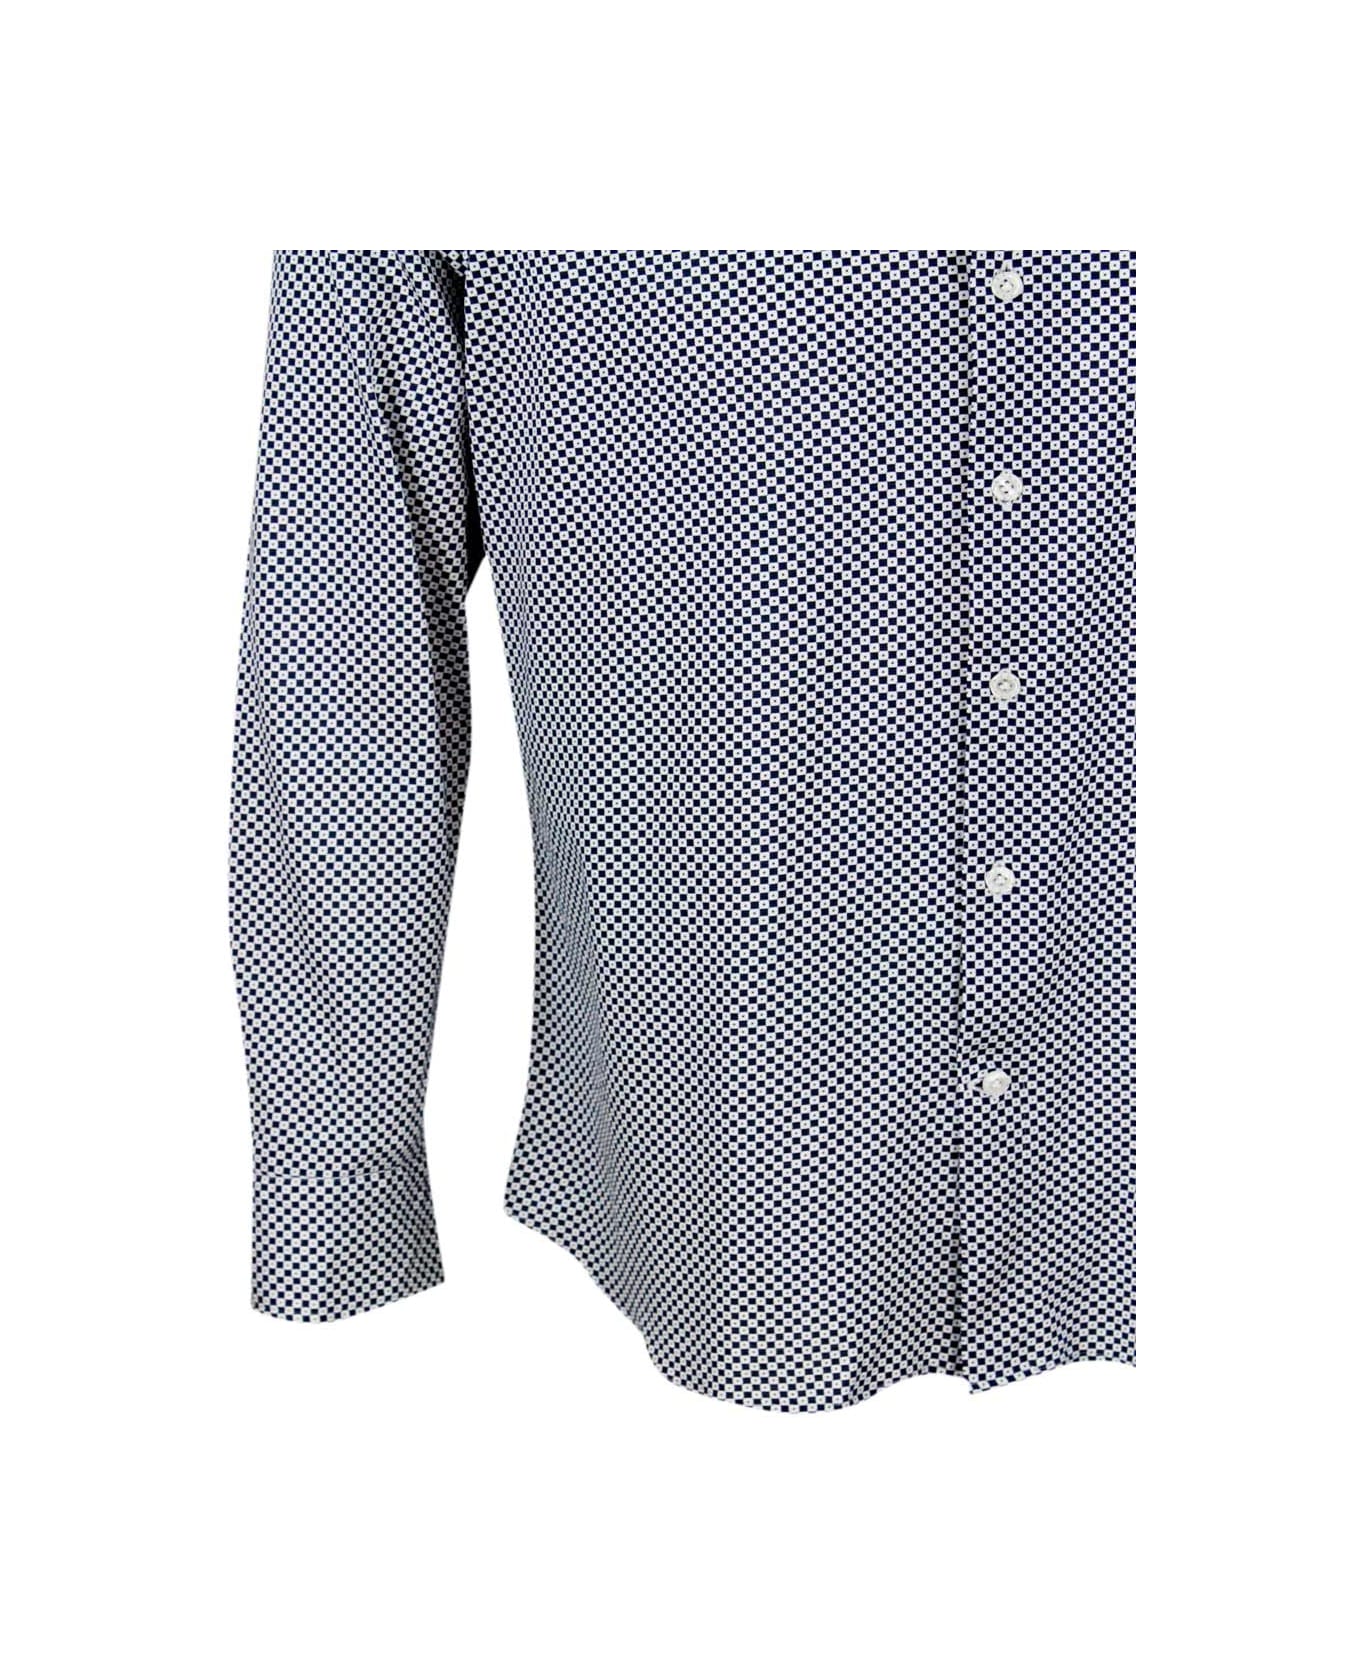 Sonrisa Luxury Shirt In Soft, Precious And Very Fine Stretch Cotton Flower With French Collar In A Small Geometric Checkered Design Print - Blu